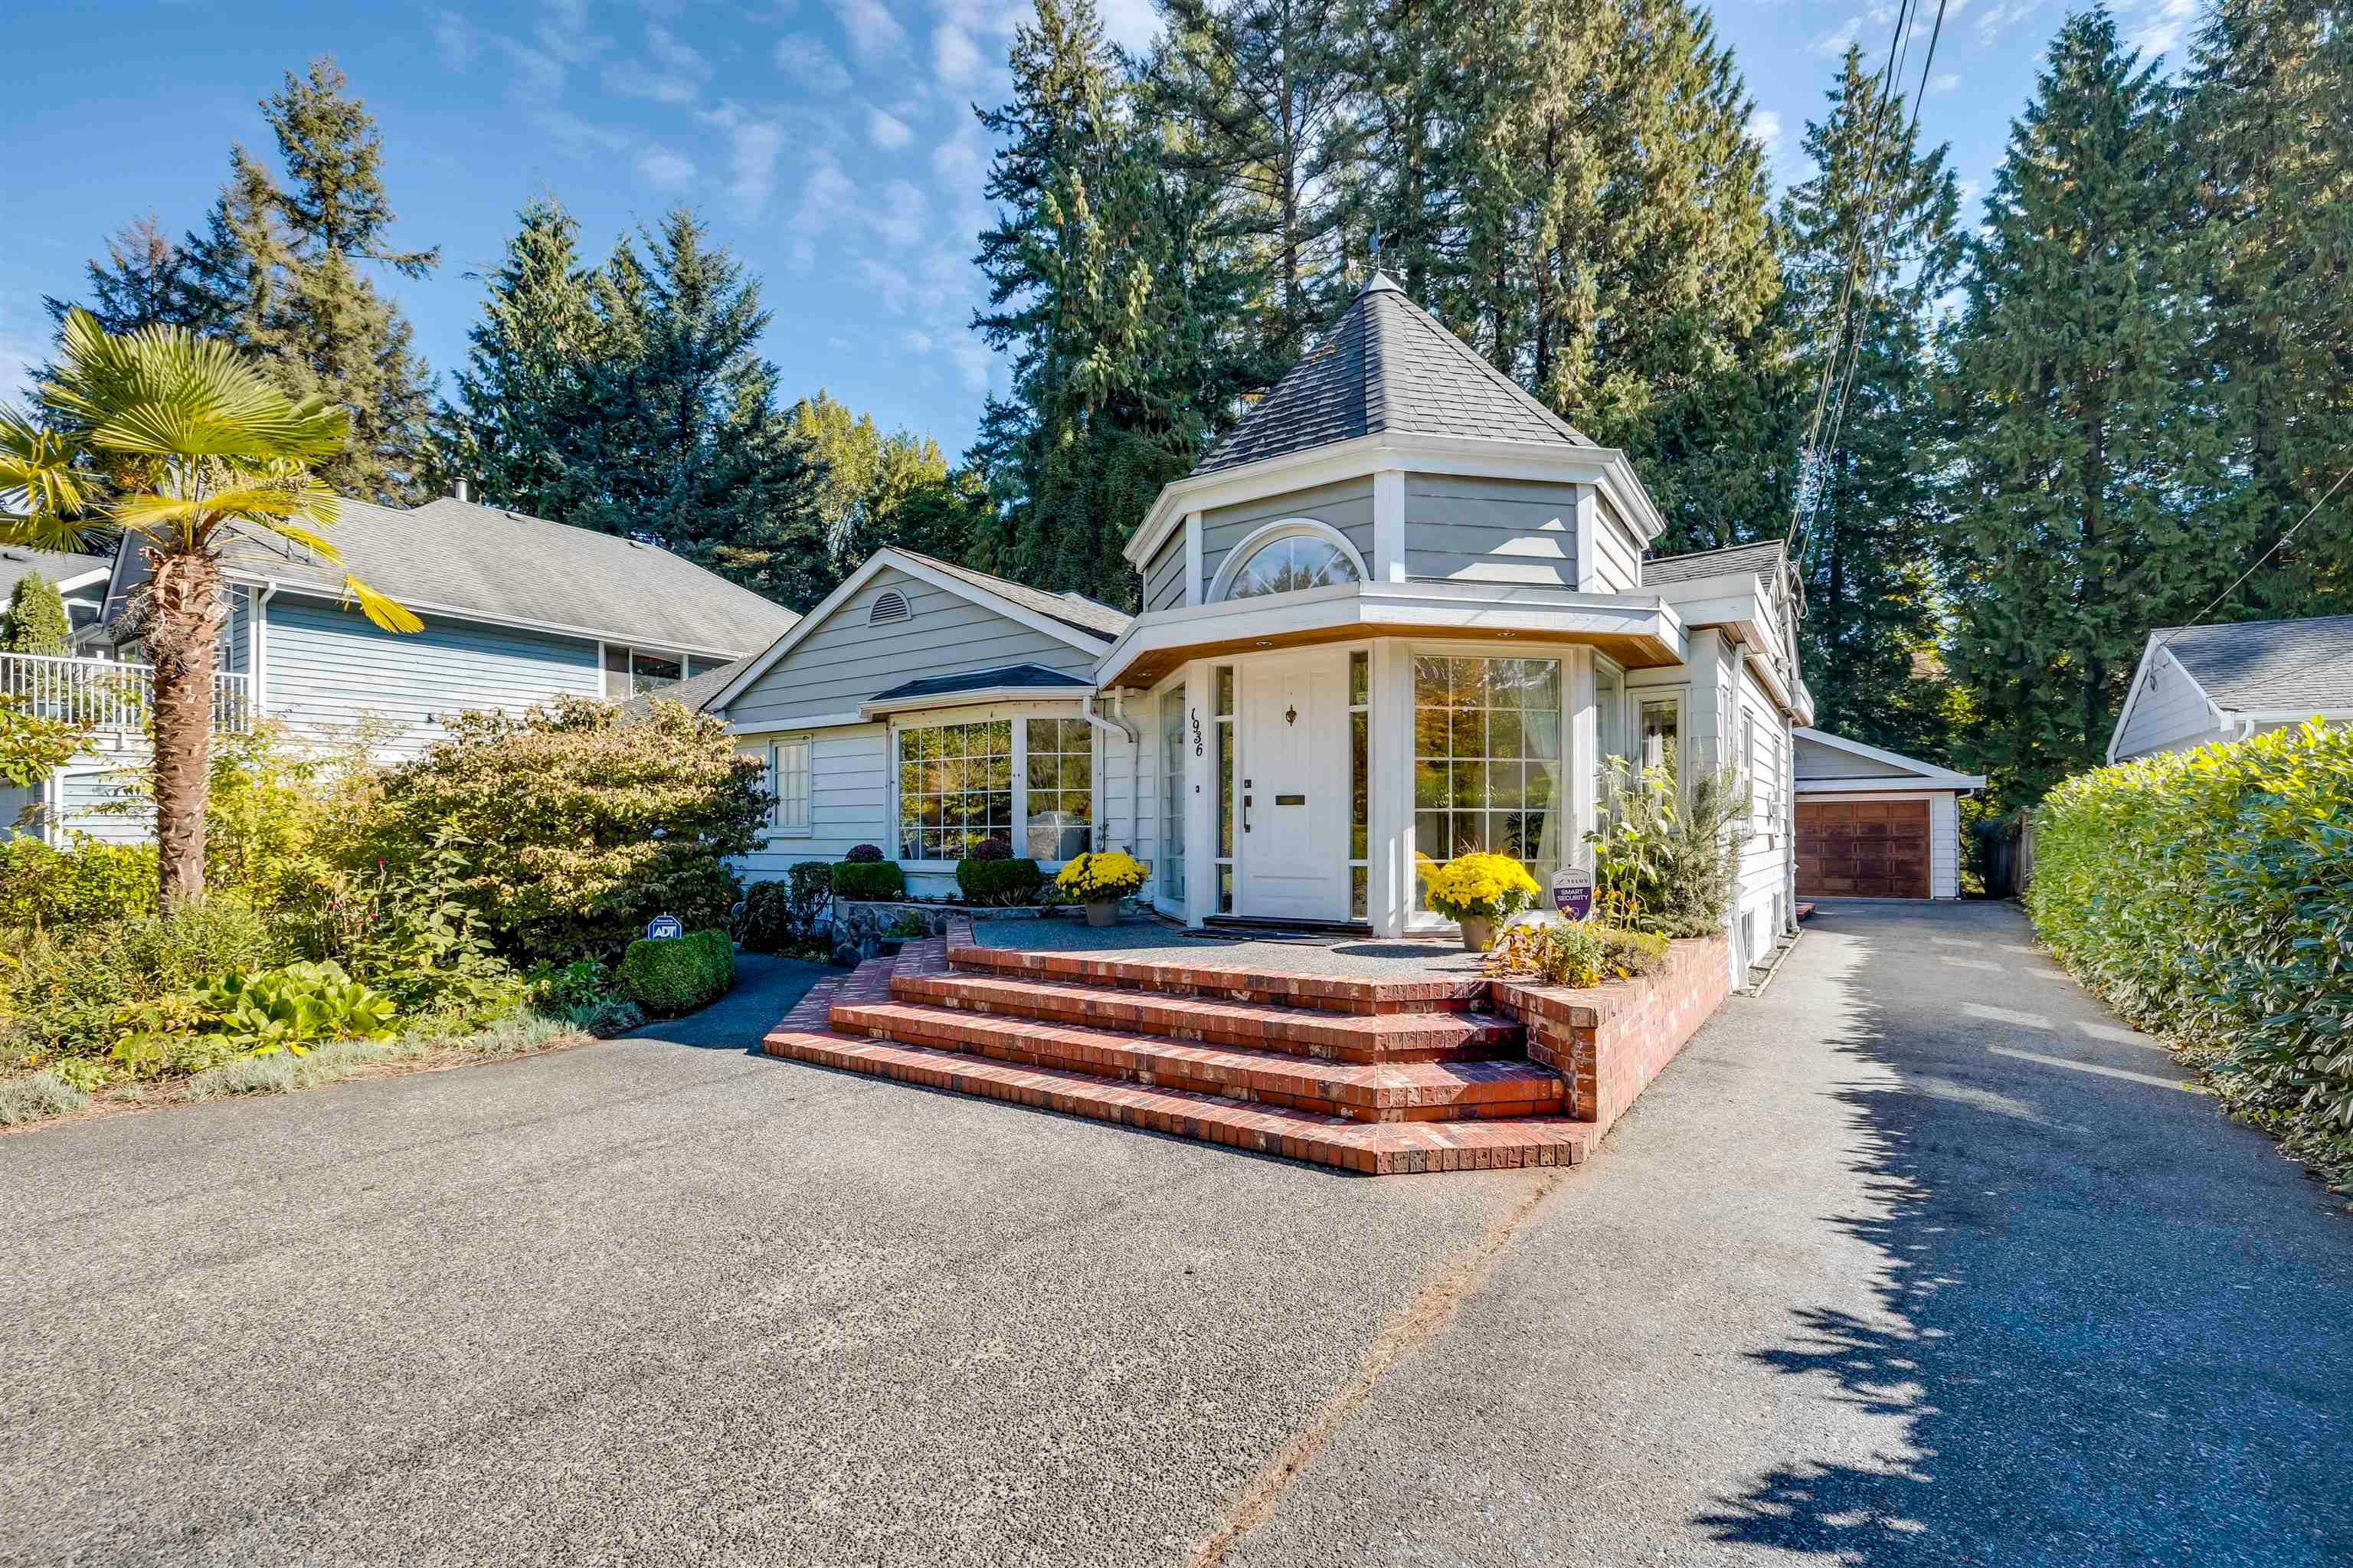 Main Photo: 1936 MACKAY Avenue in North Vancouver: Pemberton Heights House for sale : MLS®# R2621071